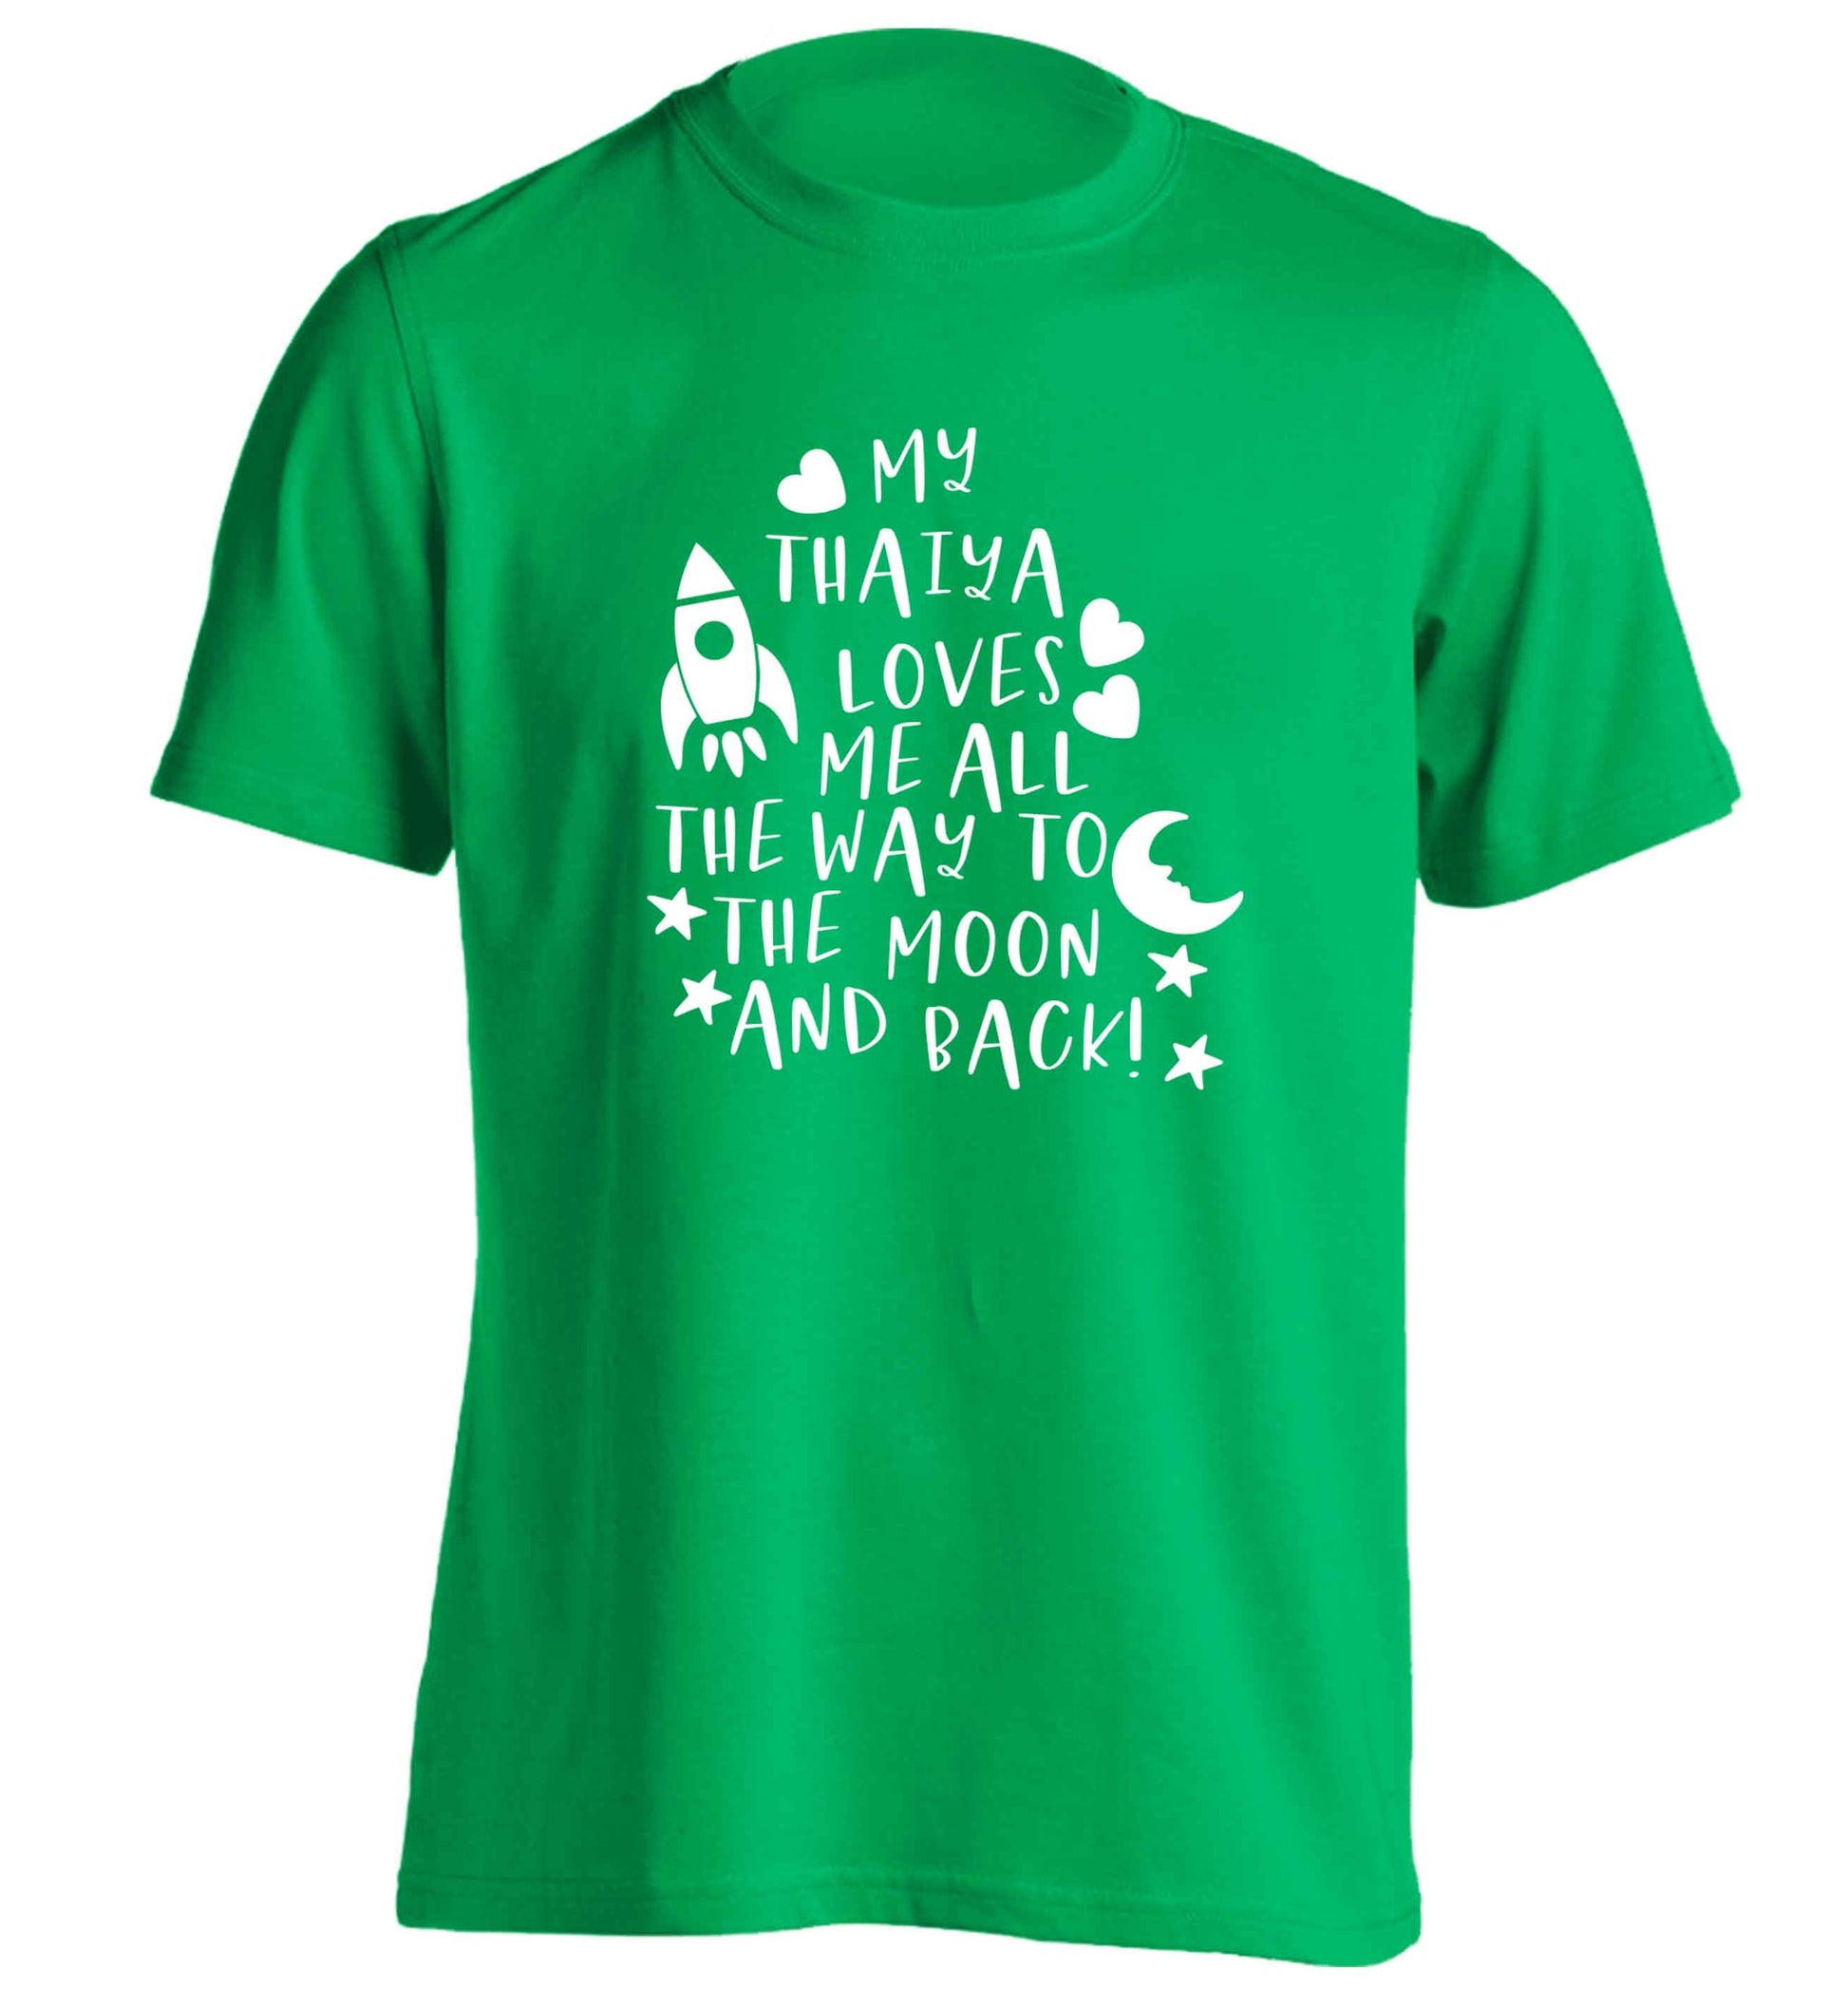 My thaiya loves me all the way to the moon and back adults unisex green Tshirt 2XL